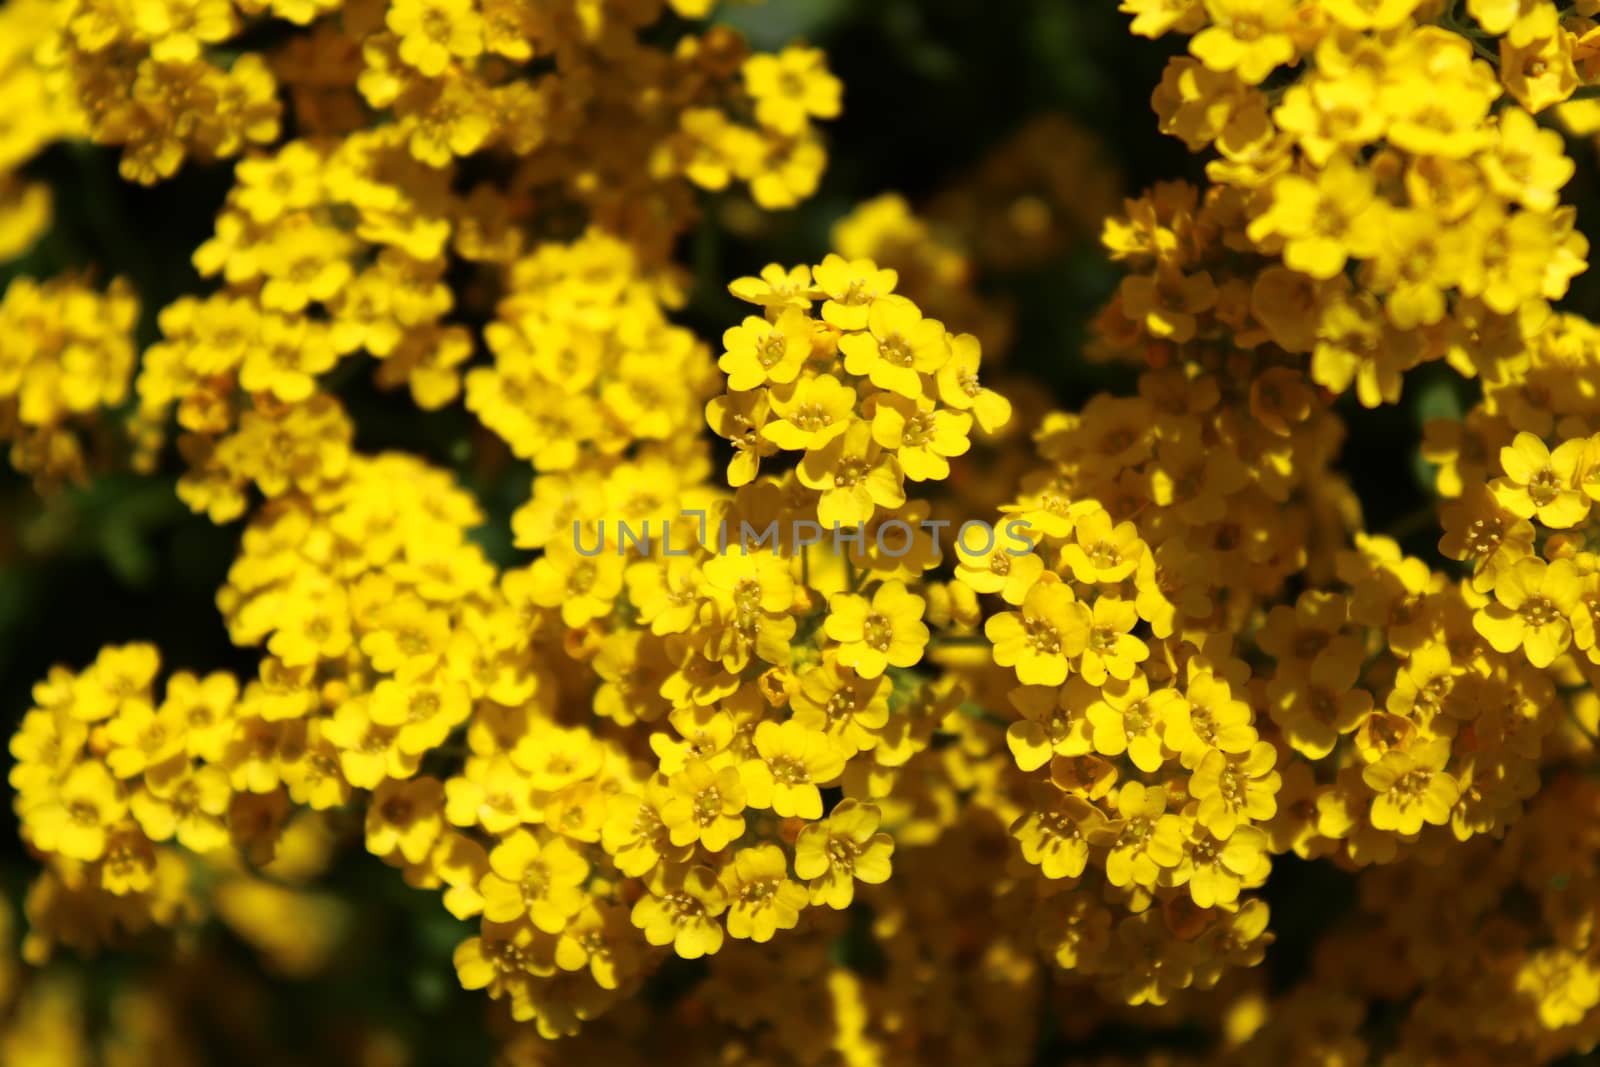 The picture shows sweet alyssum in the spring.